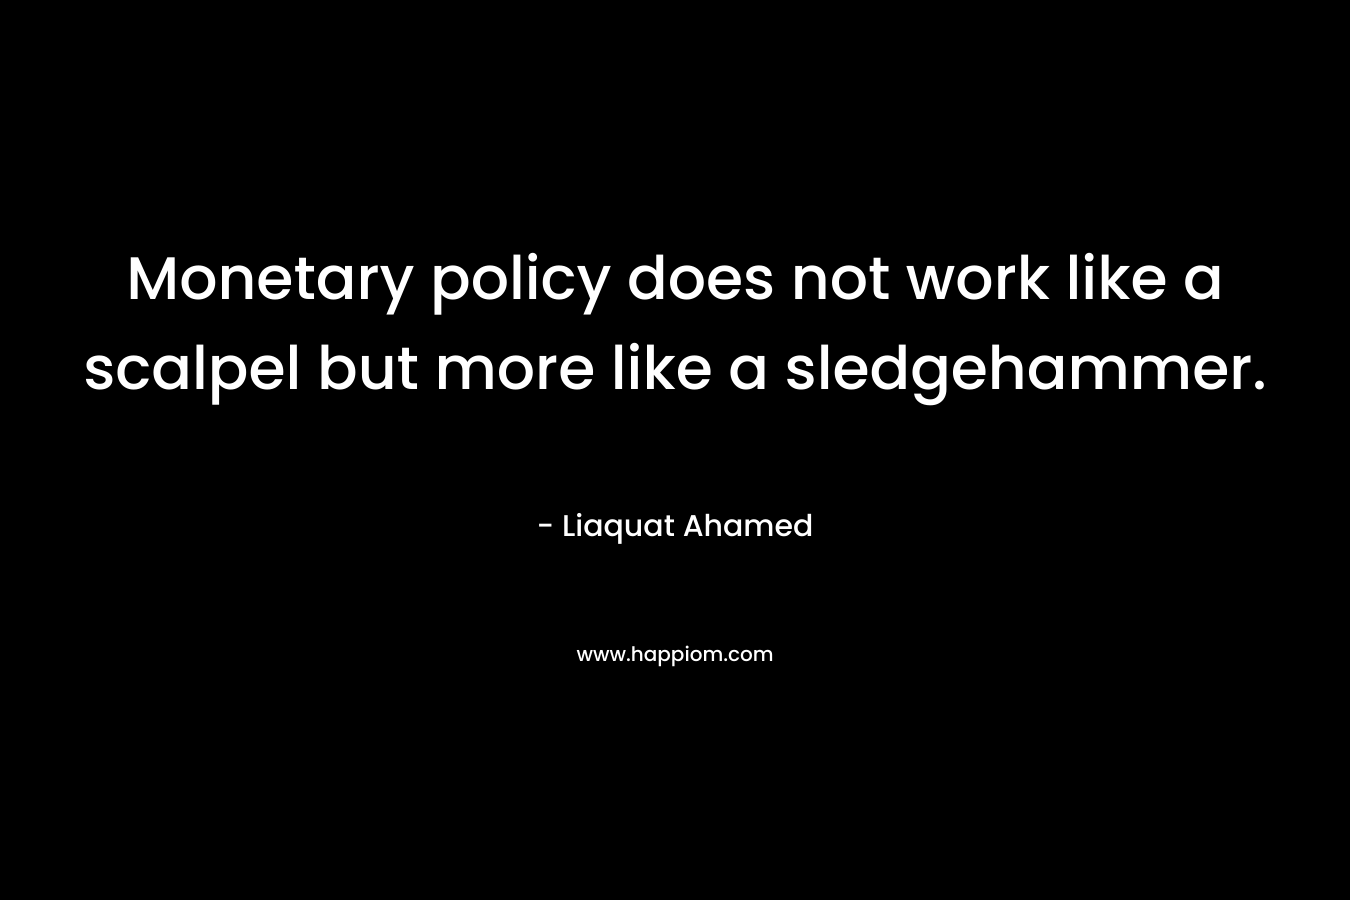 Monetary policy does not work like a scalpel but more like a sledgehammer. – Liaquat Ahamed